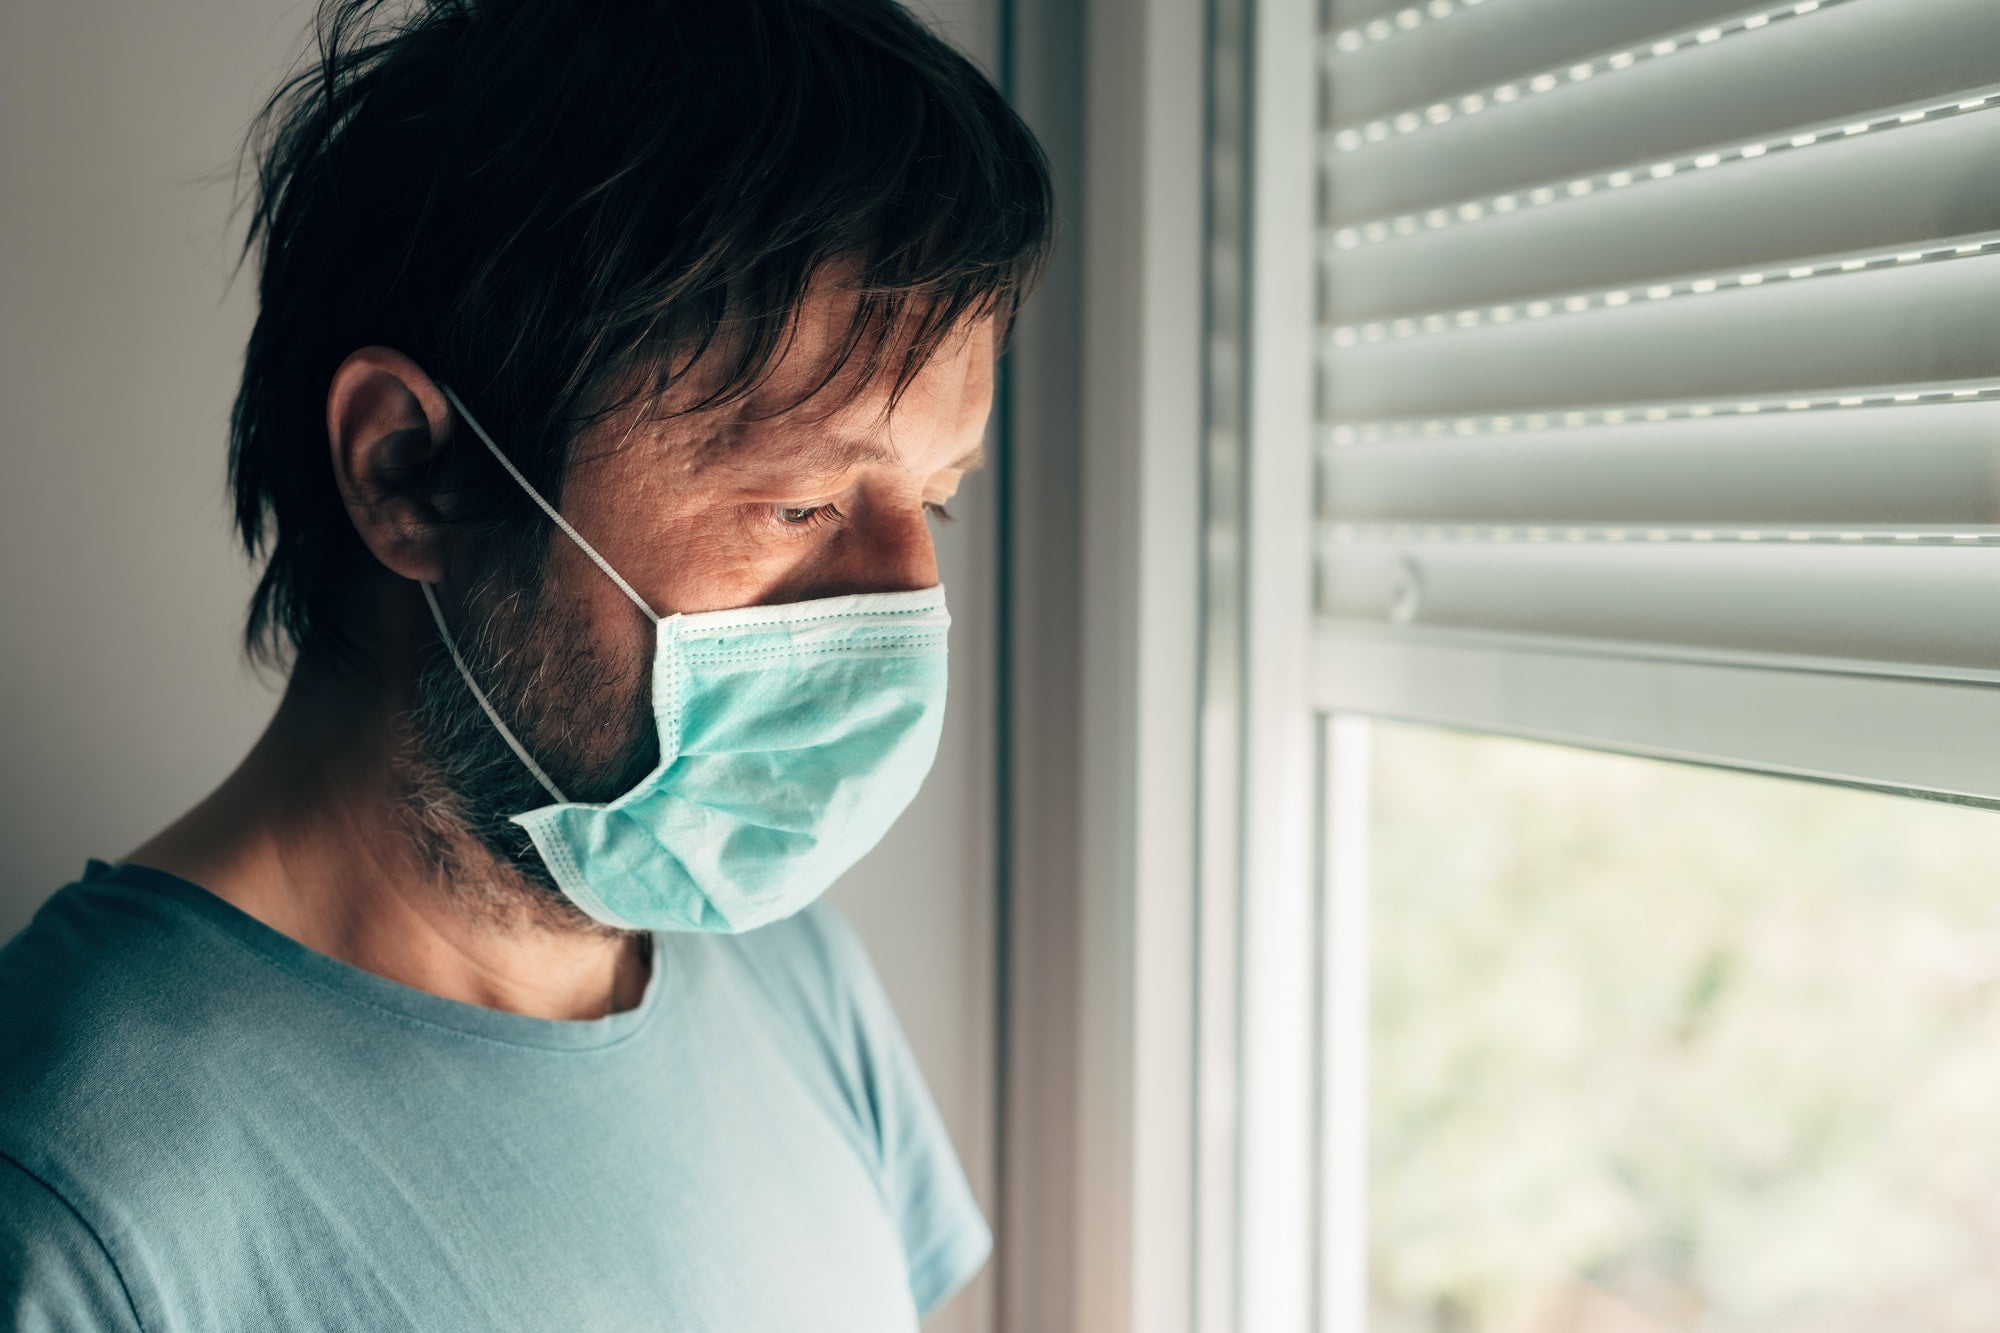 Depressed man with protective mask in self-isolation quarantine during virus outbreak pandemic